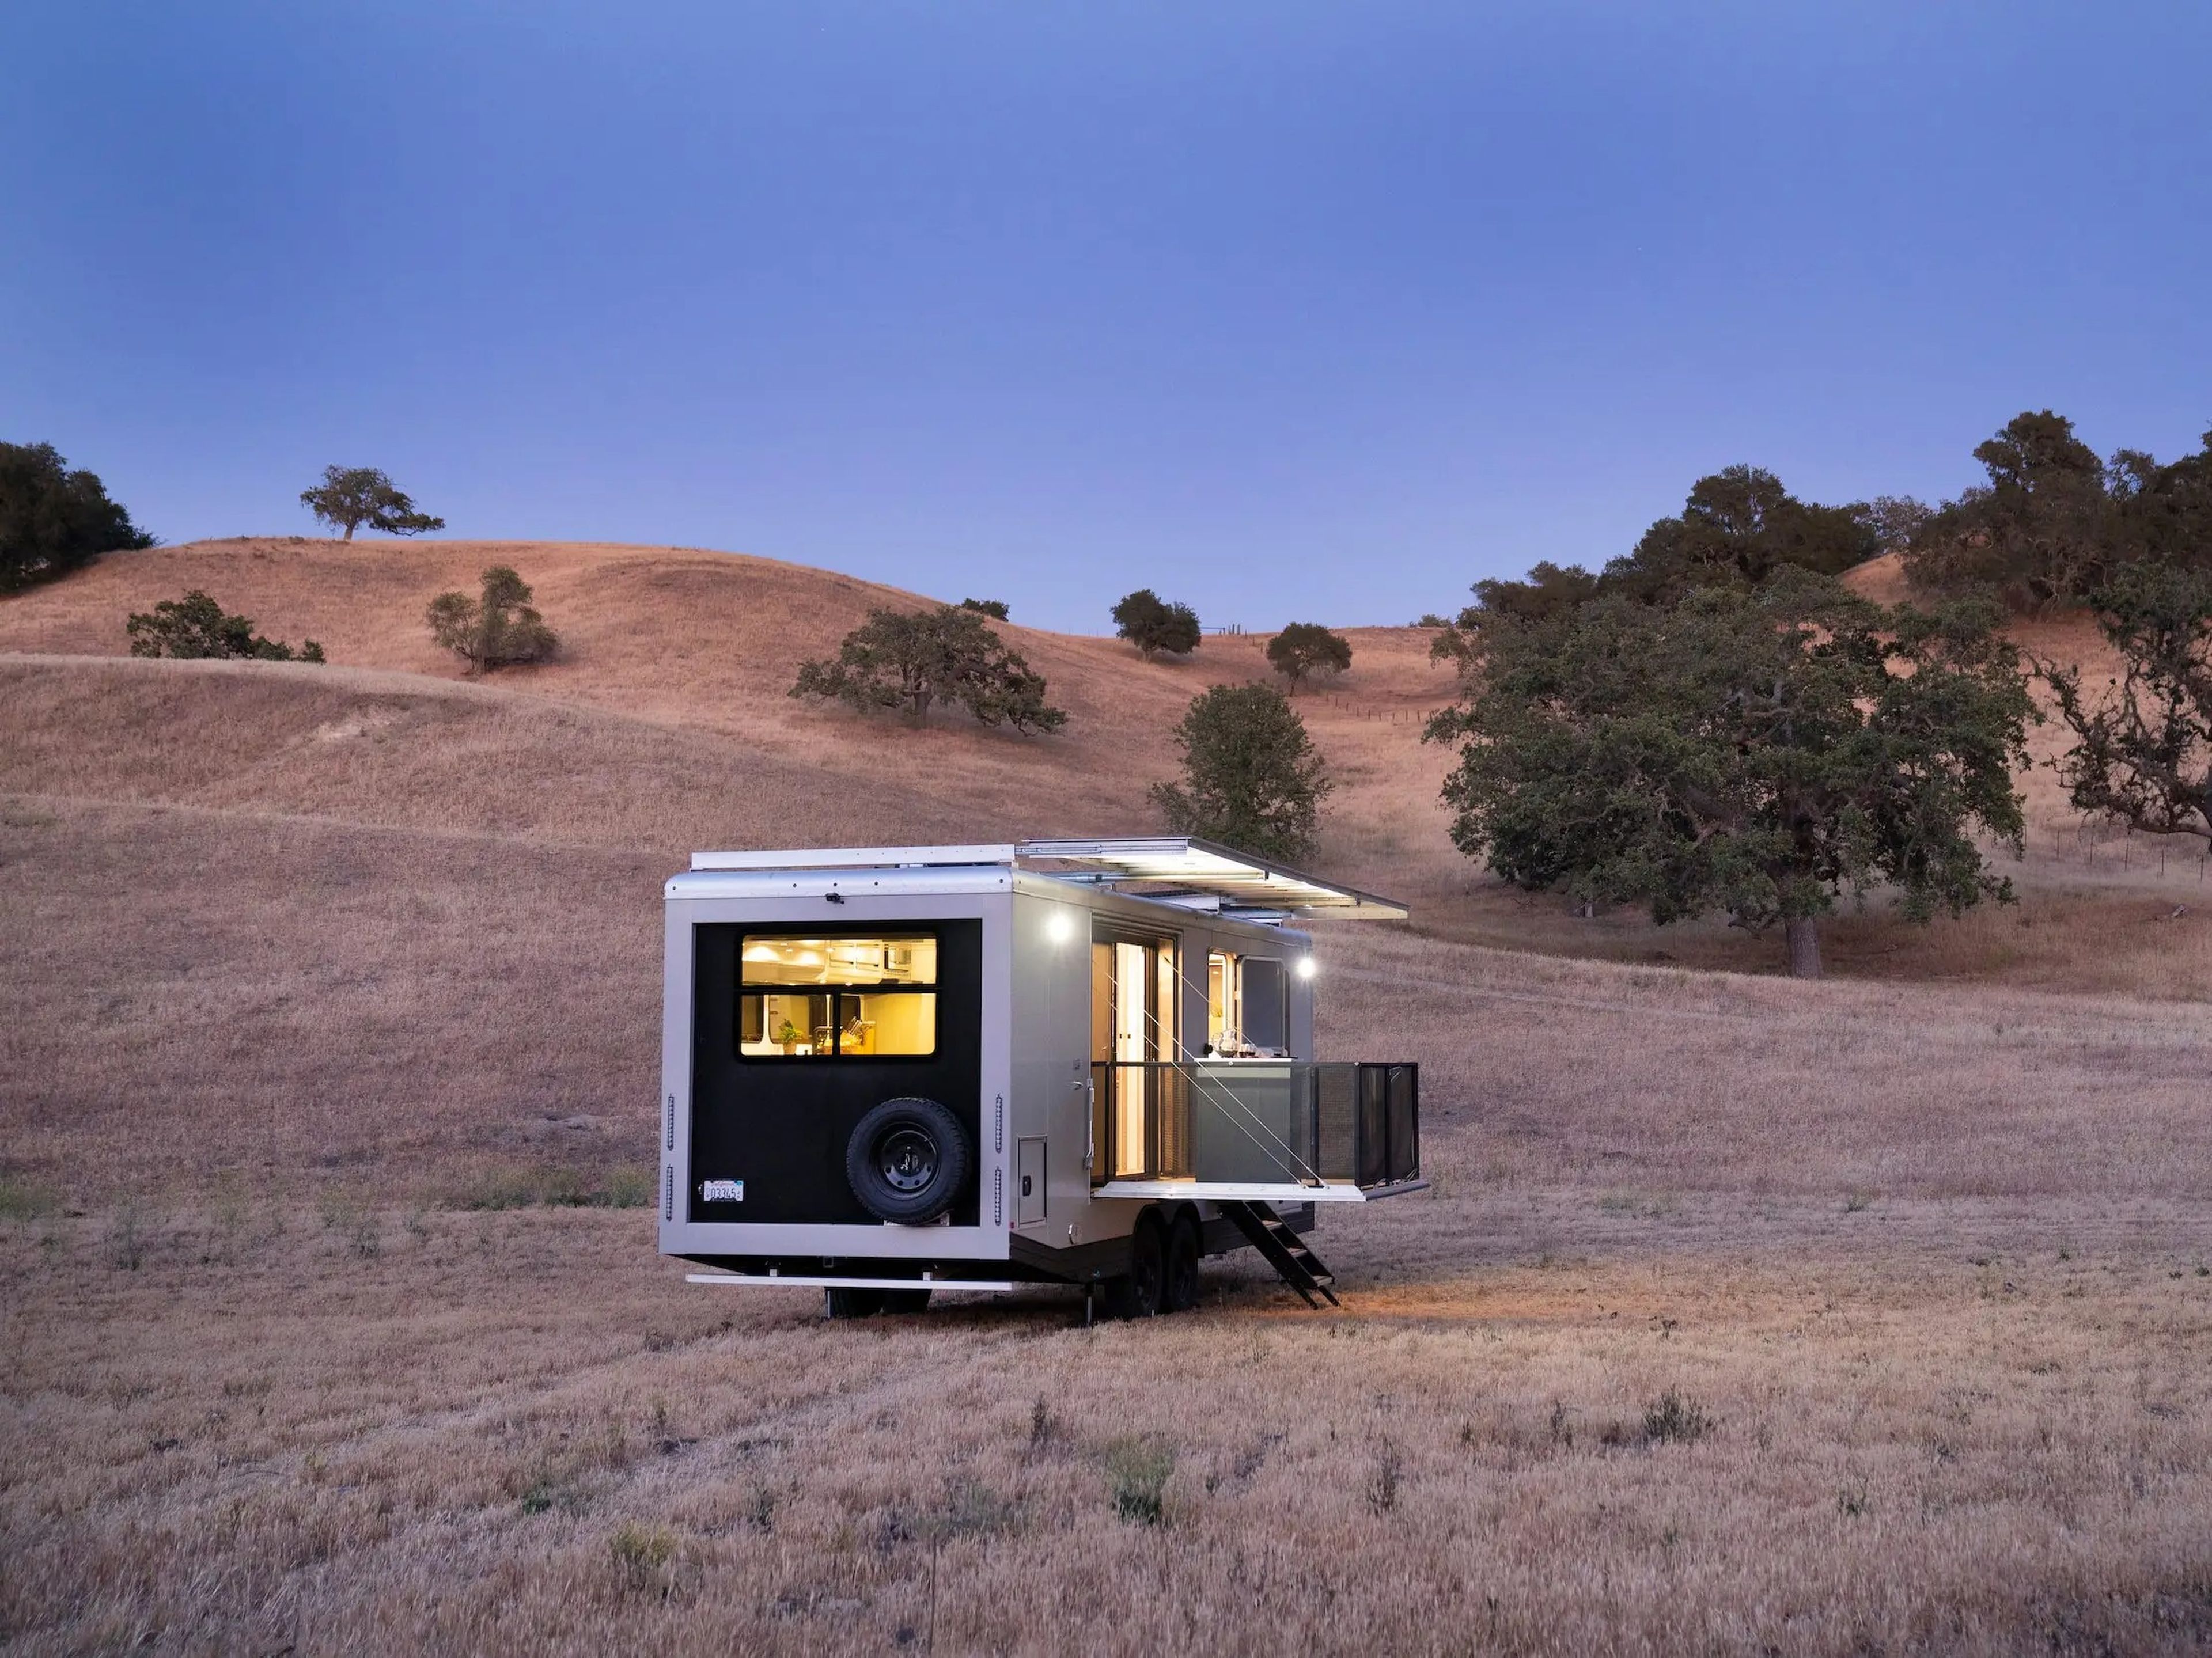 The exterior of the travel trailer as it sits on a brown field at dusk. The lights are on inside.